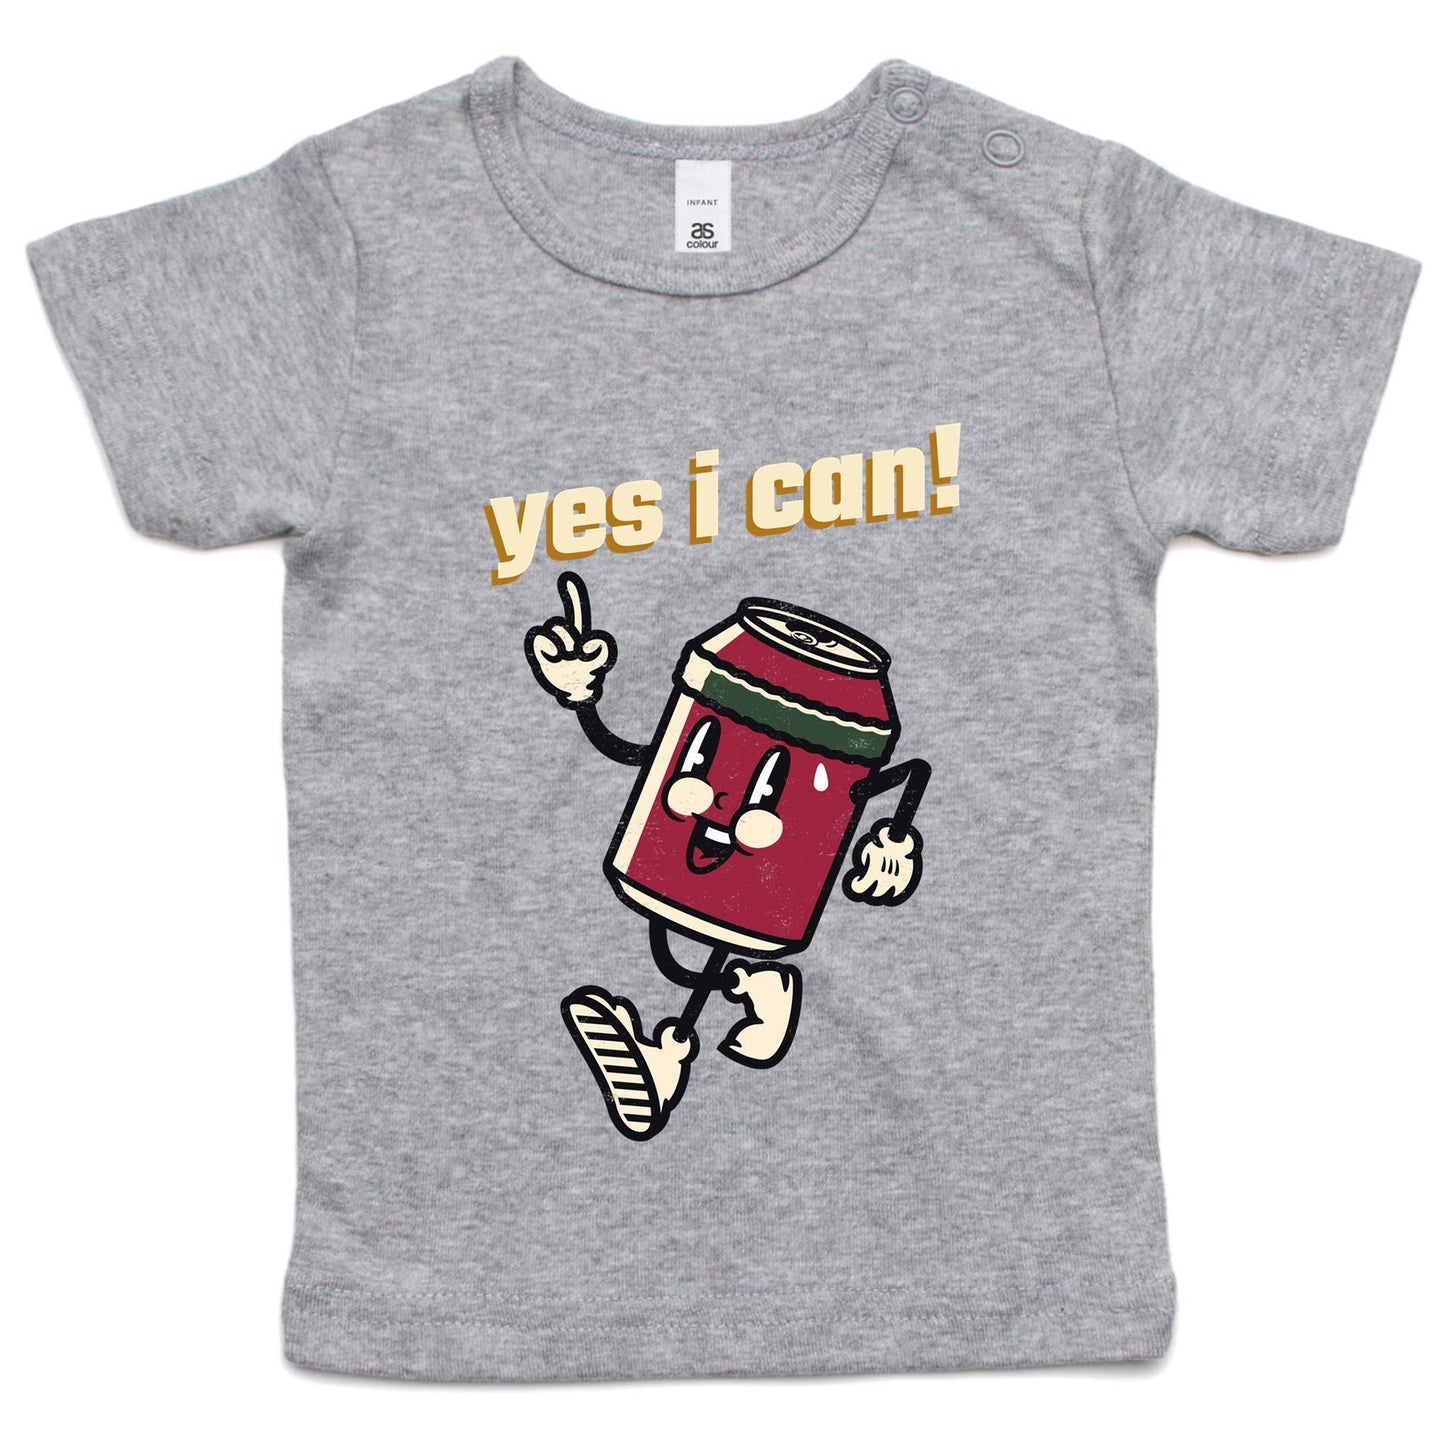 Yes I Can! - Baby T-shirt Grey Marle Baby T-shirt Motivation Retro